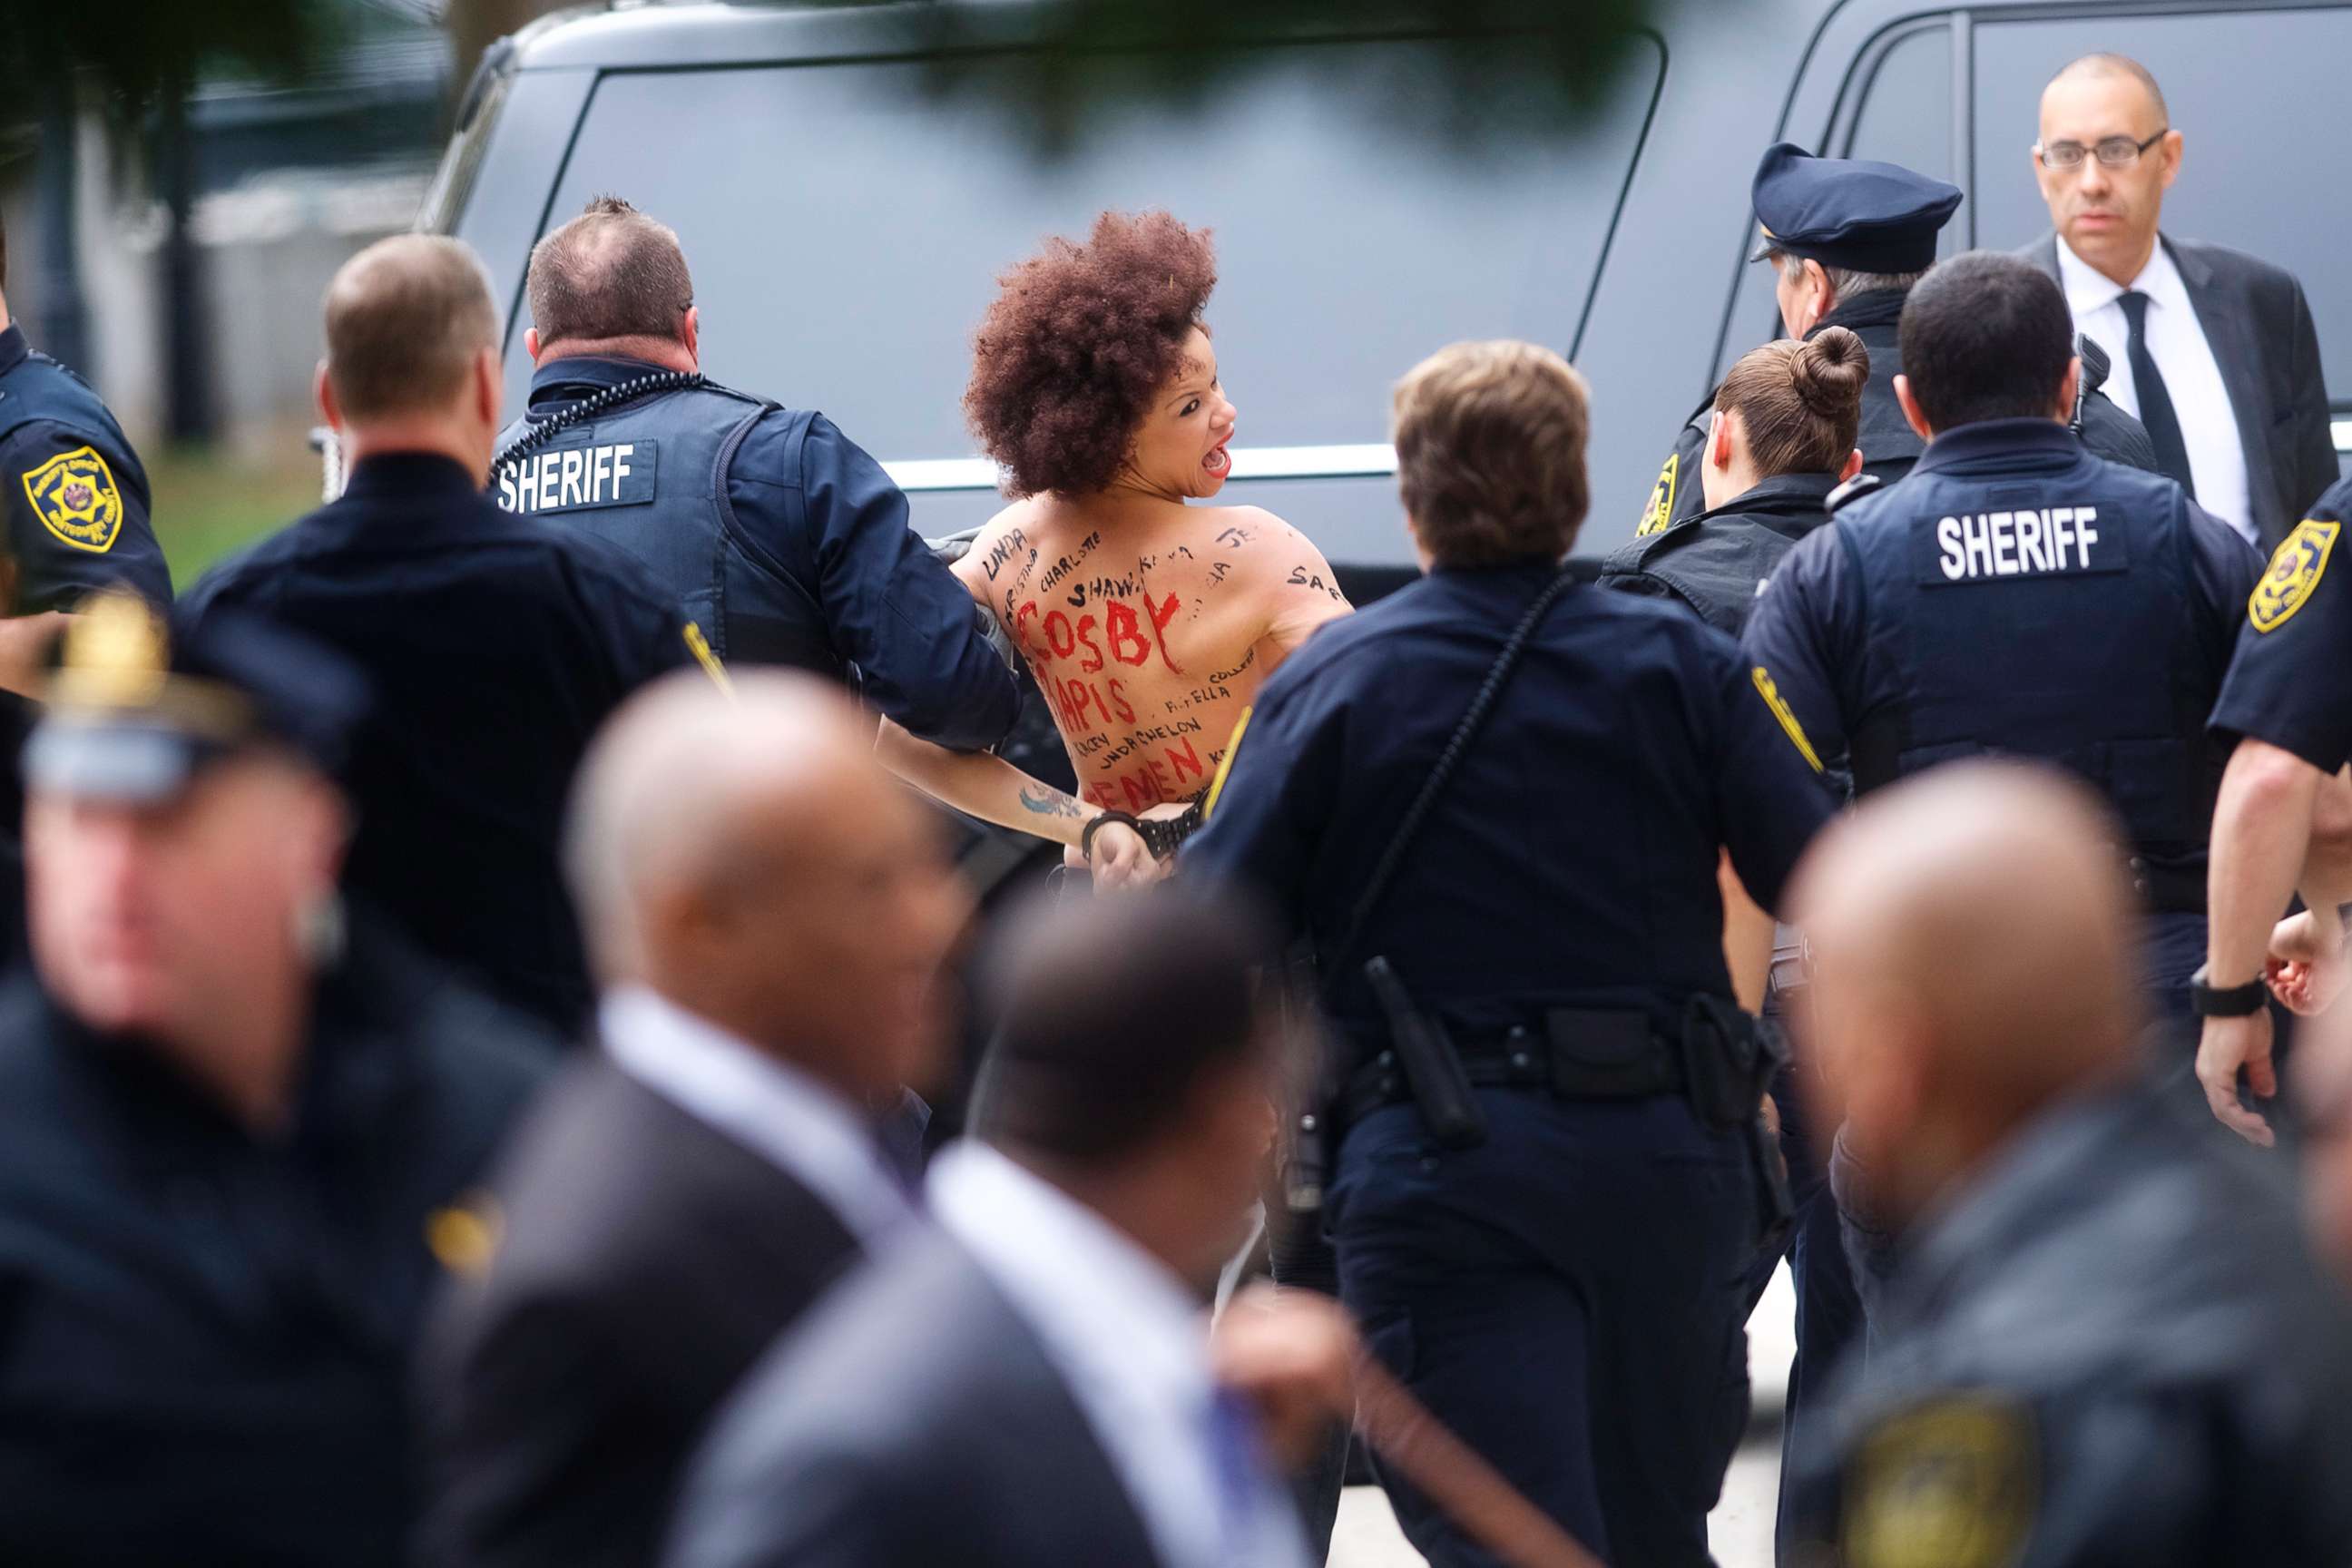 PHOTO: A topless protester wearing body paint is arrested as Bill Cosby arrives at the Montgomery County Courthouse for the first day of his sexual assault retrial on April 9, 2018 in Norristown, Pa.